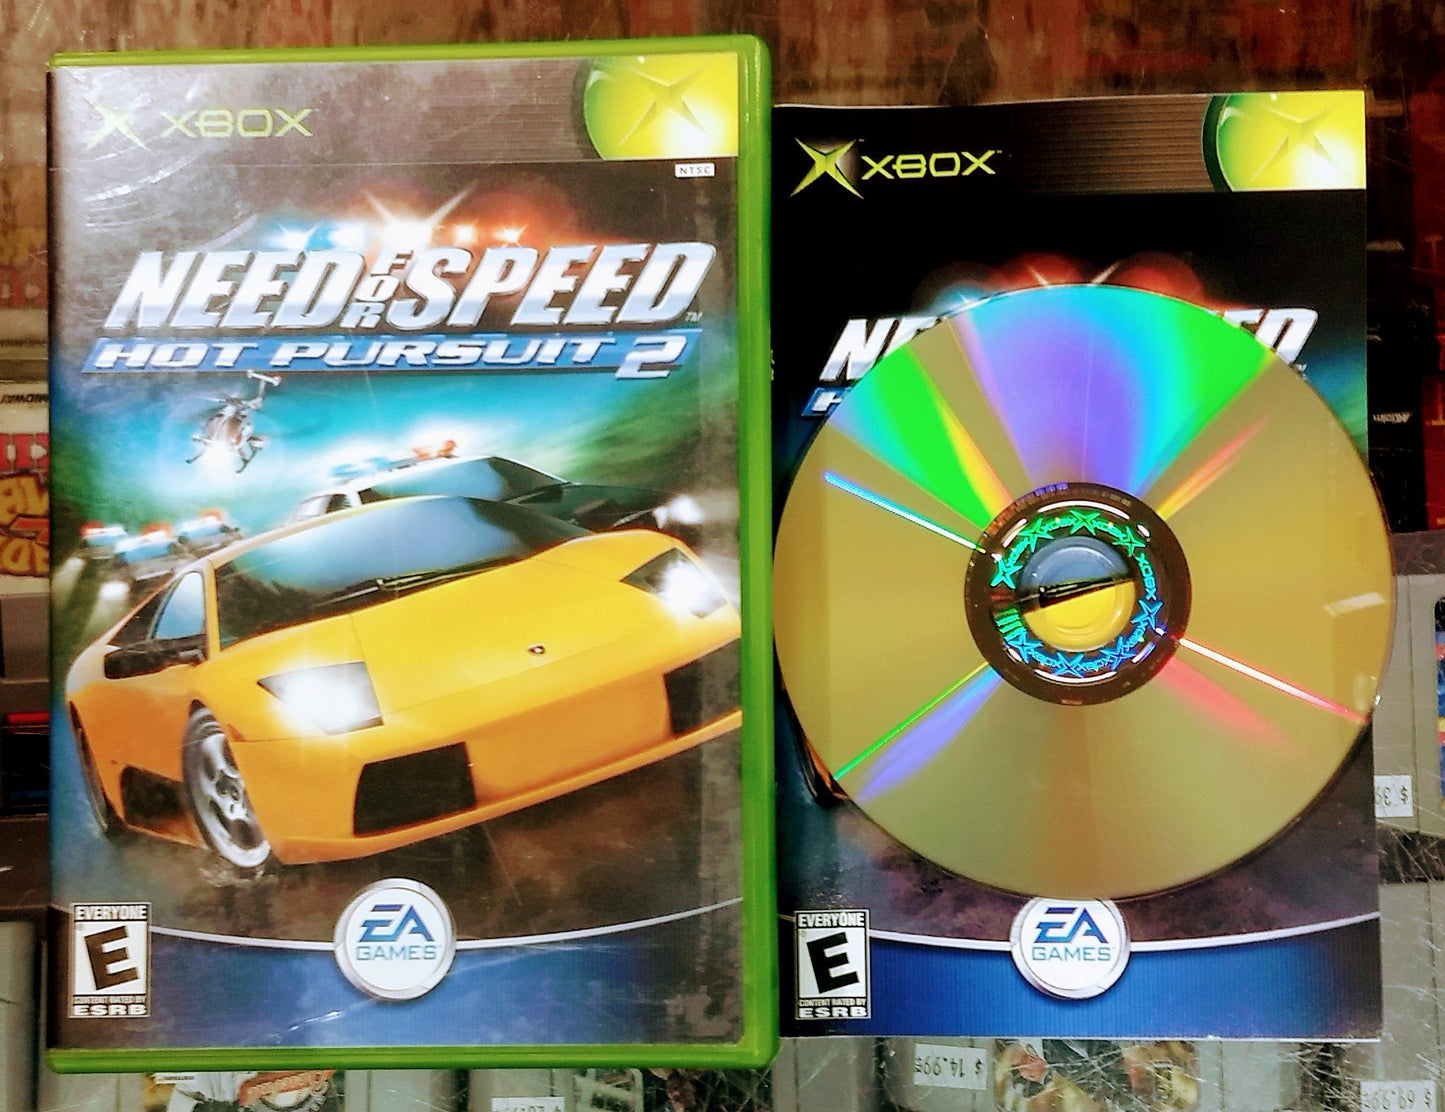 NEED FOR SPEED NFS HOT PURSUIT 2 (XBOX) - jeux video game-x